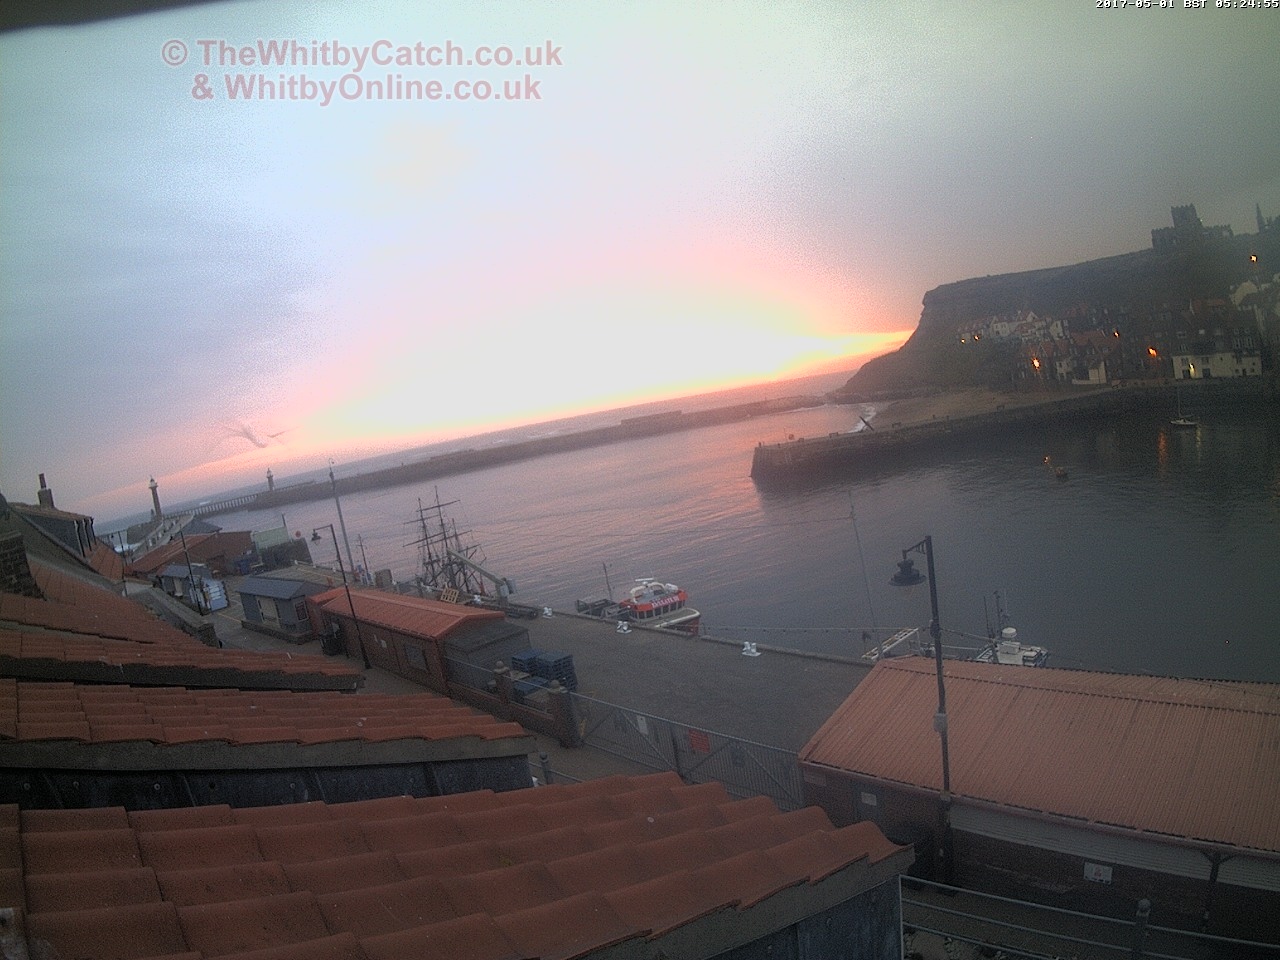 Whitby Mon 1st May 2017 05:25.